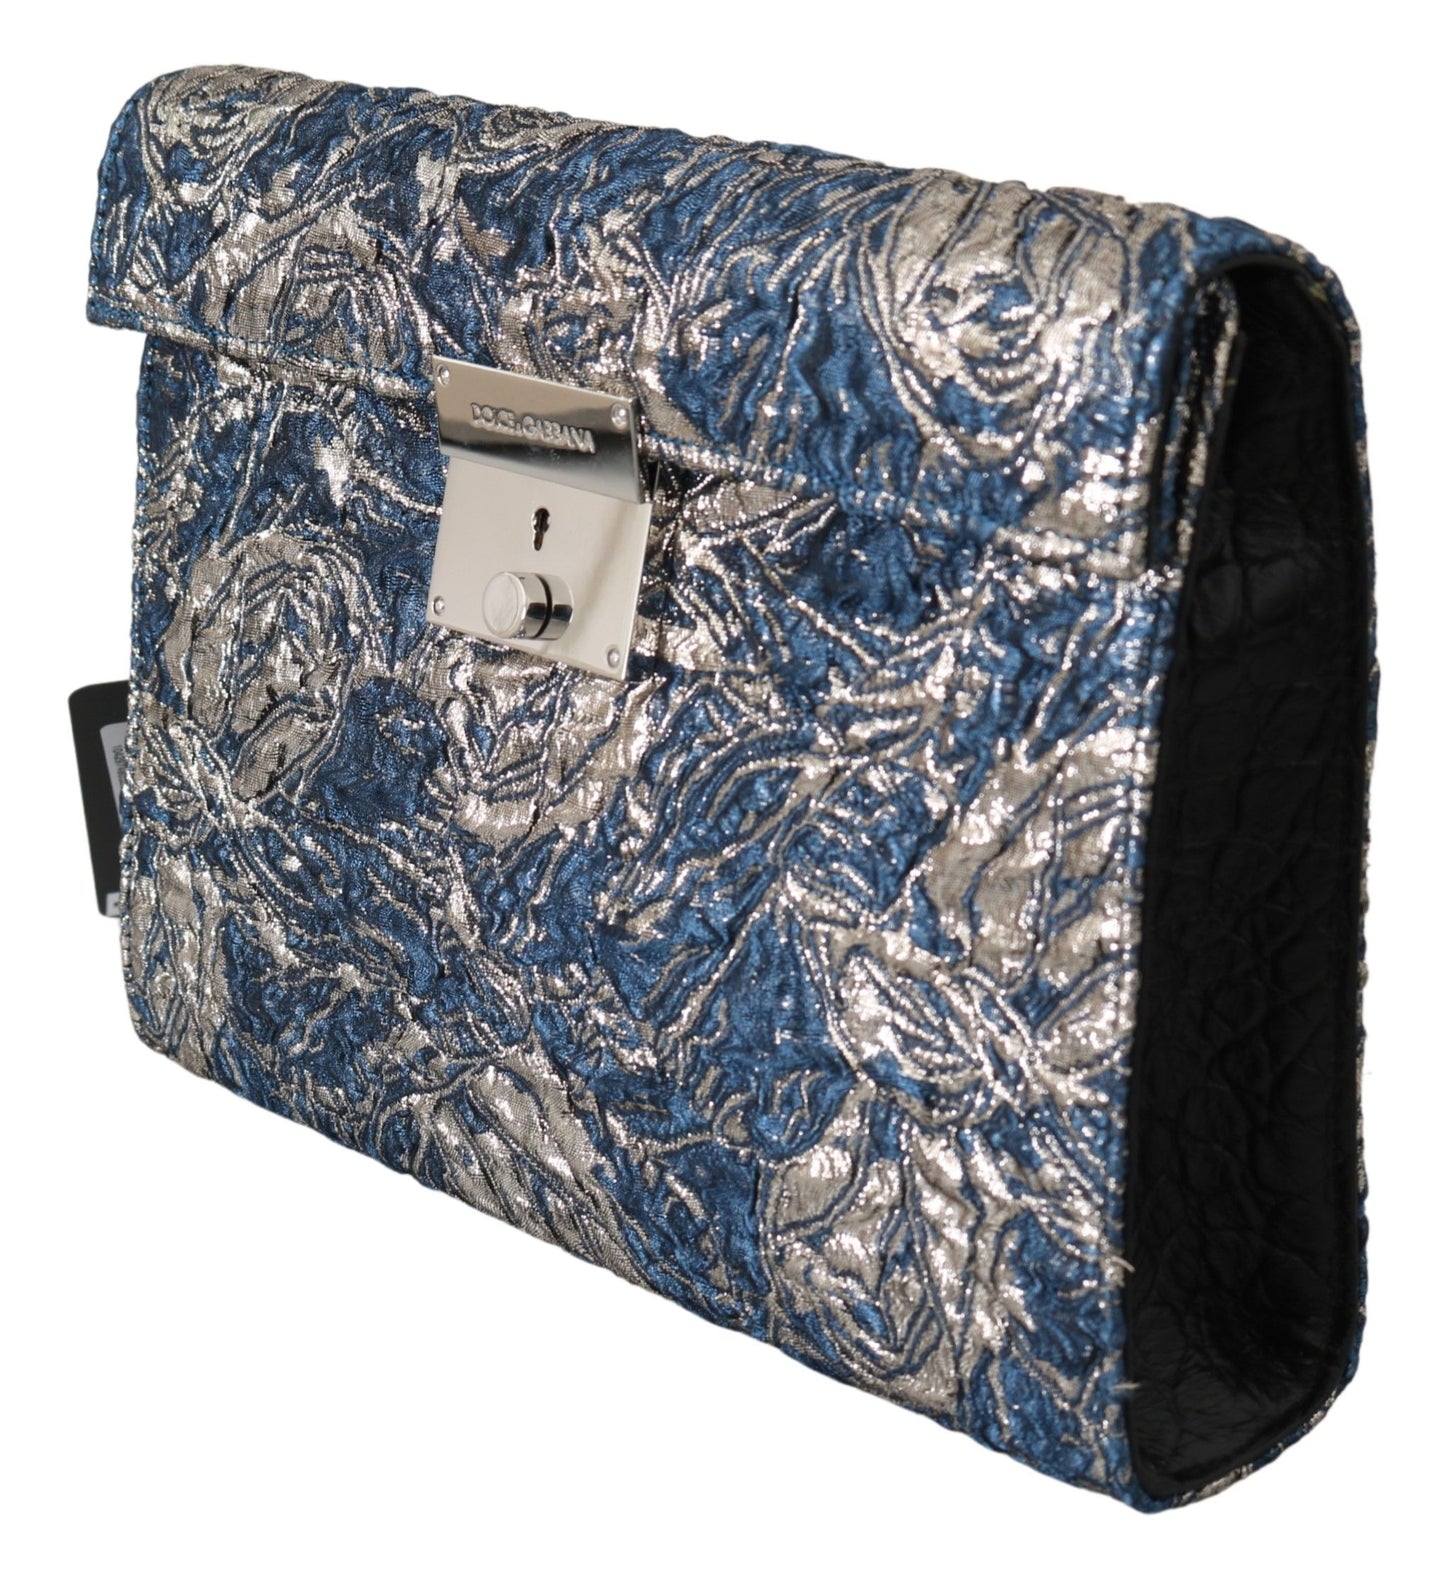 Blue Silver Jacquard Leather Document Briefcase Bag - Designed by Dolce & Gabbana Available to Buy at a Discounted Price on Moon Behind The Hill Online Designer Discount Store